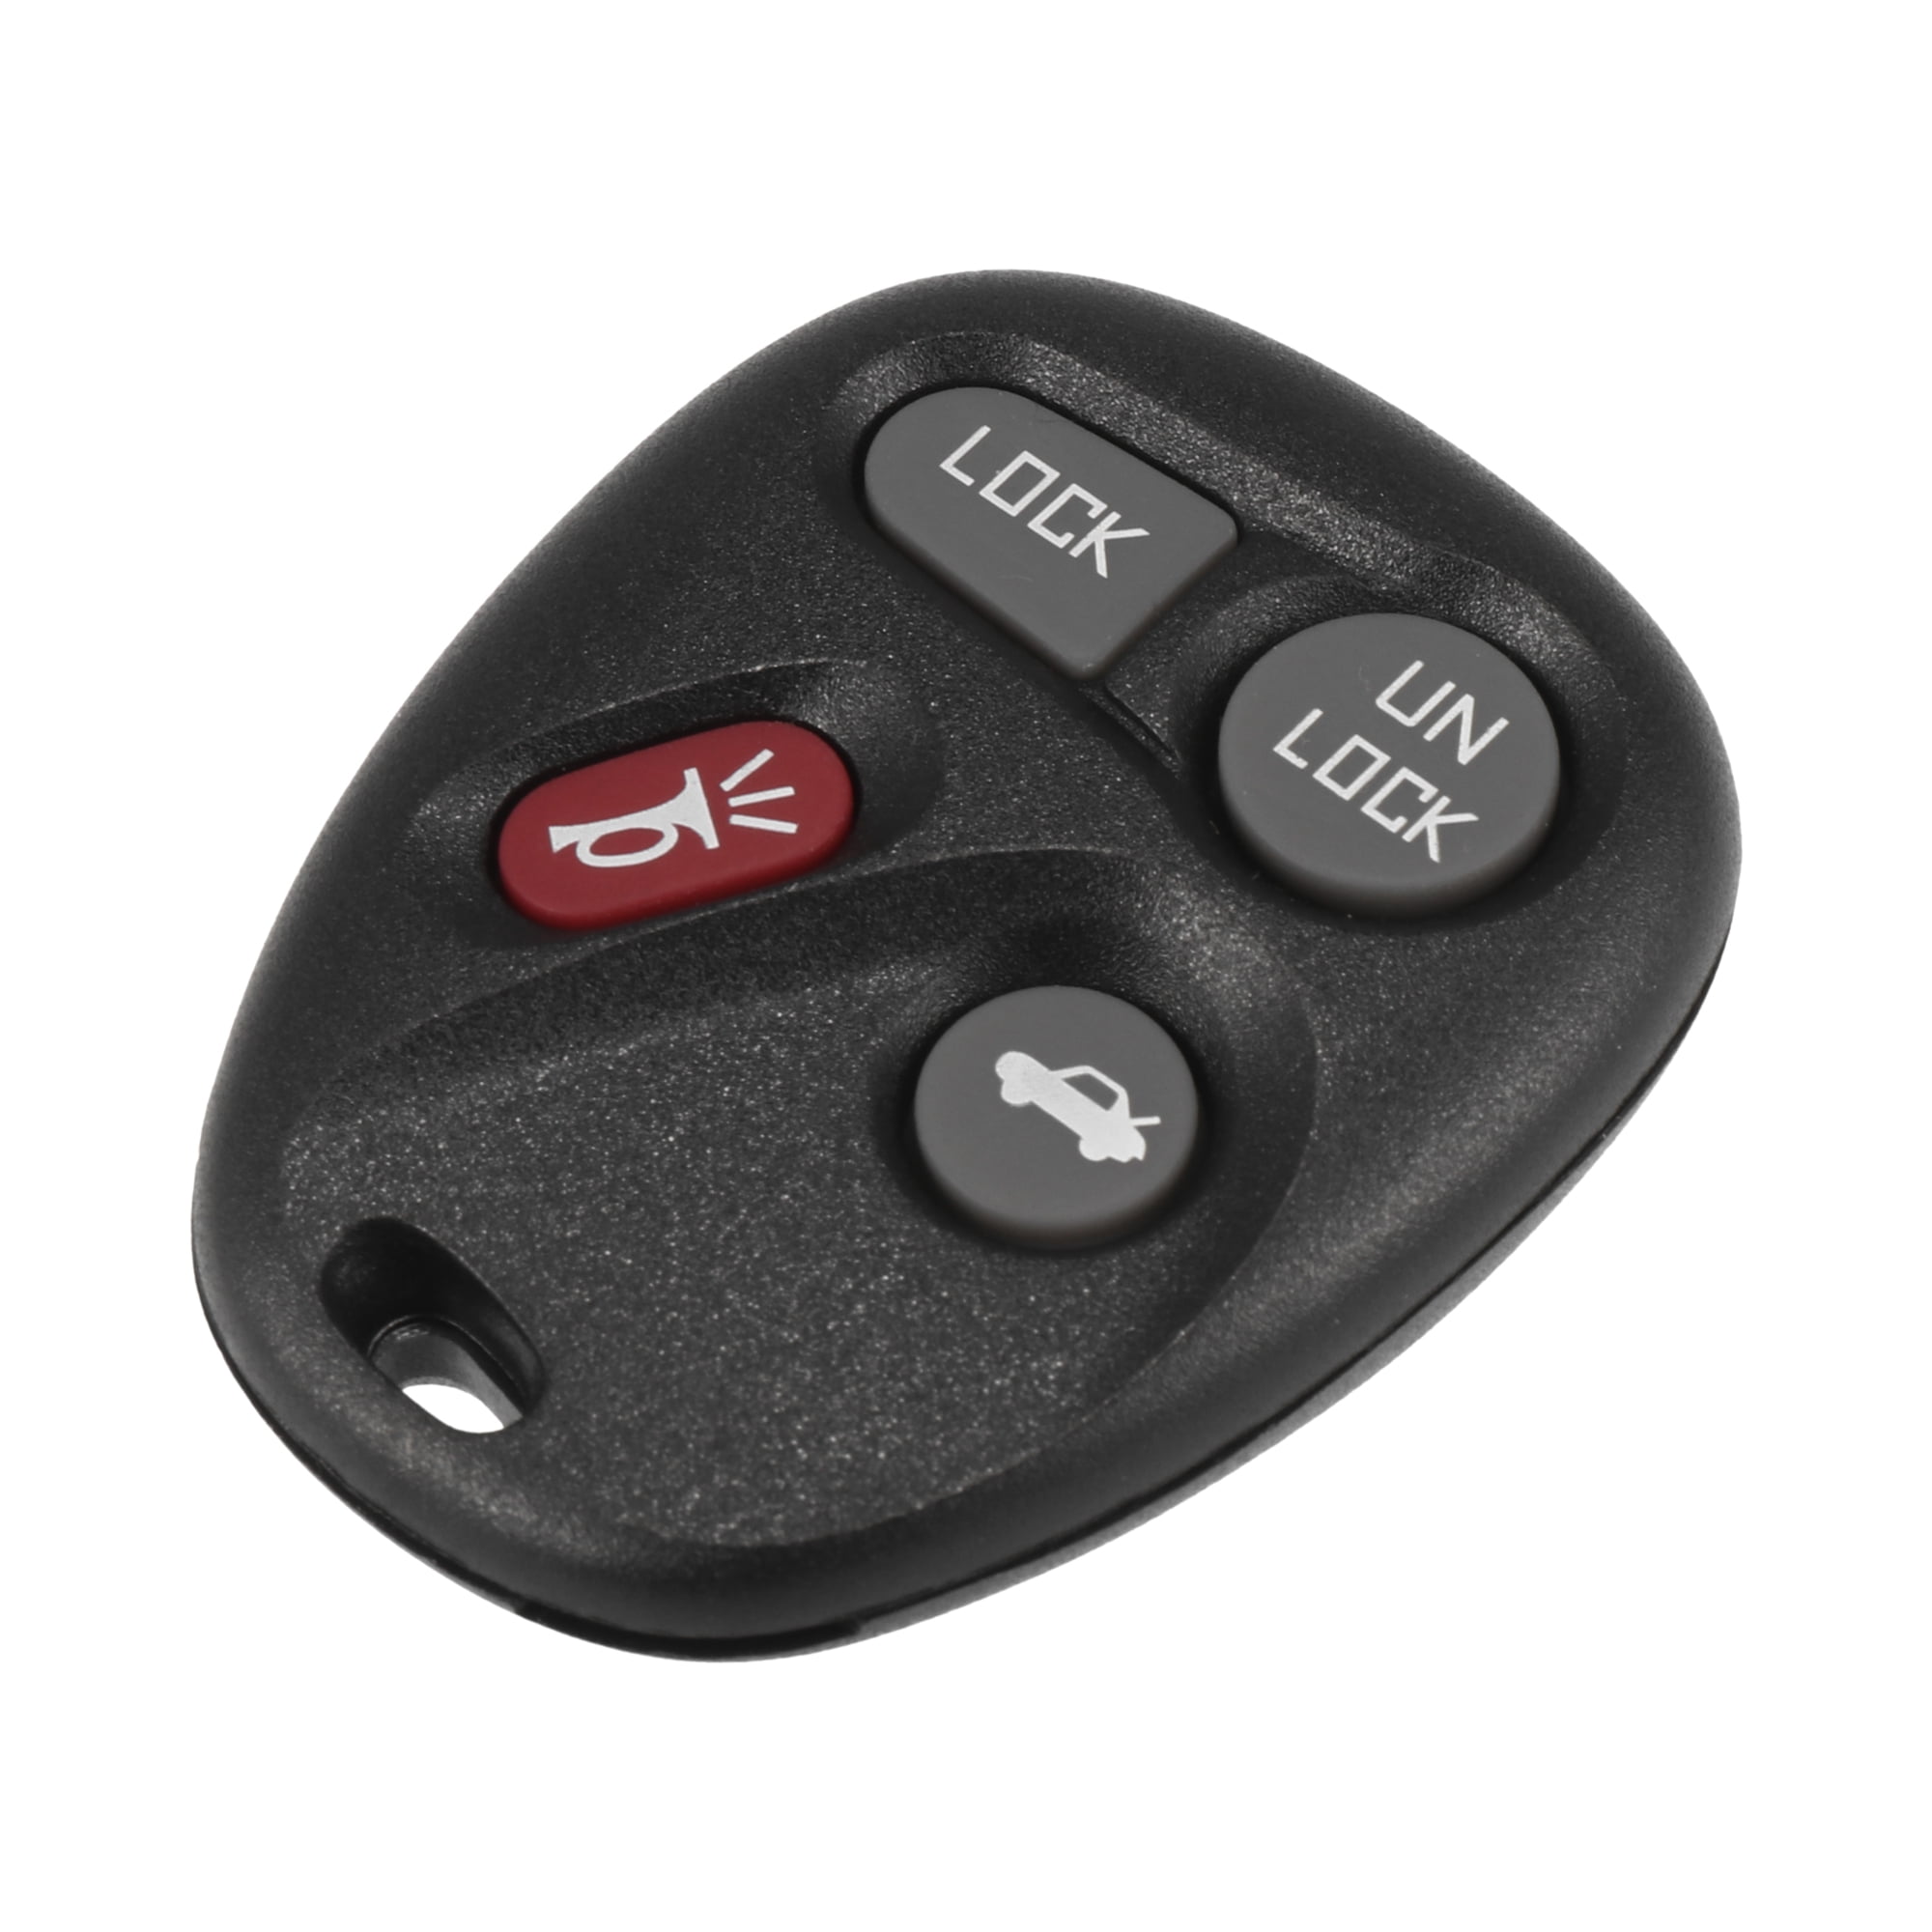 2P New Replacement Key Fob Keyless Entry Remote Control Transmitter 10443537 4b 